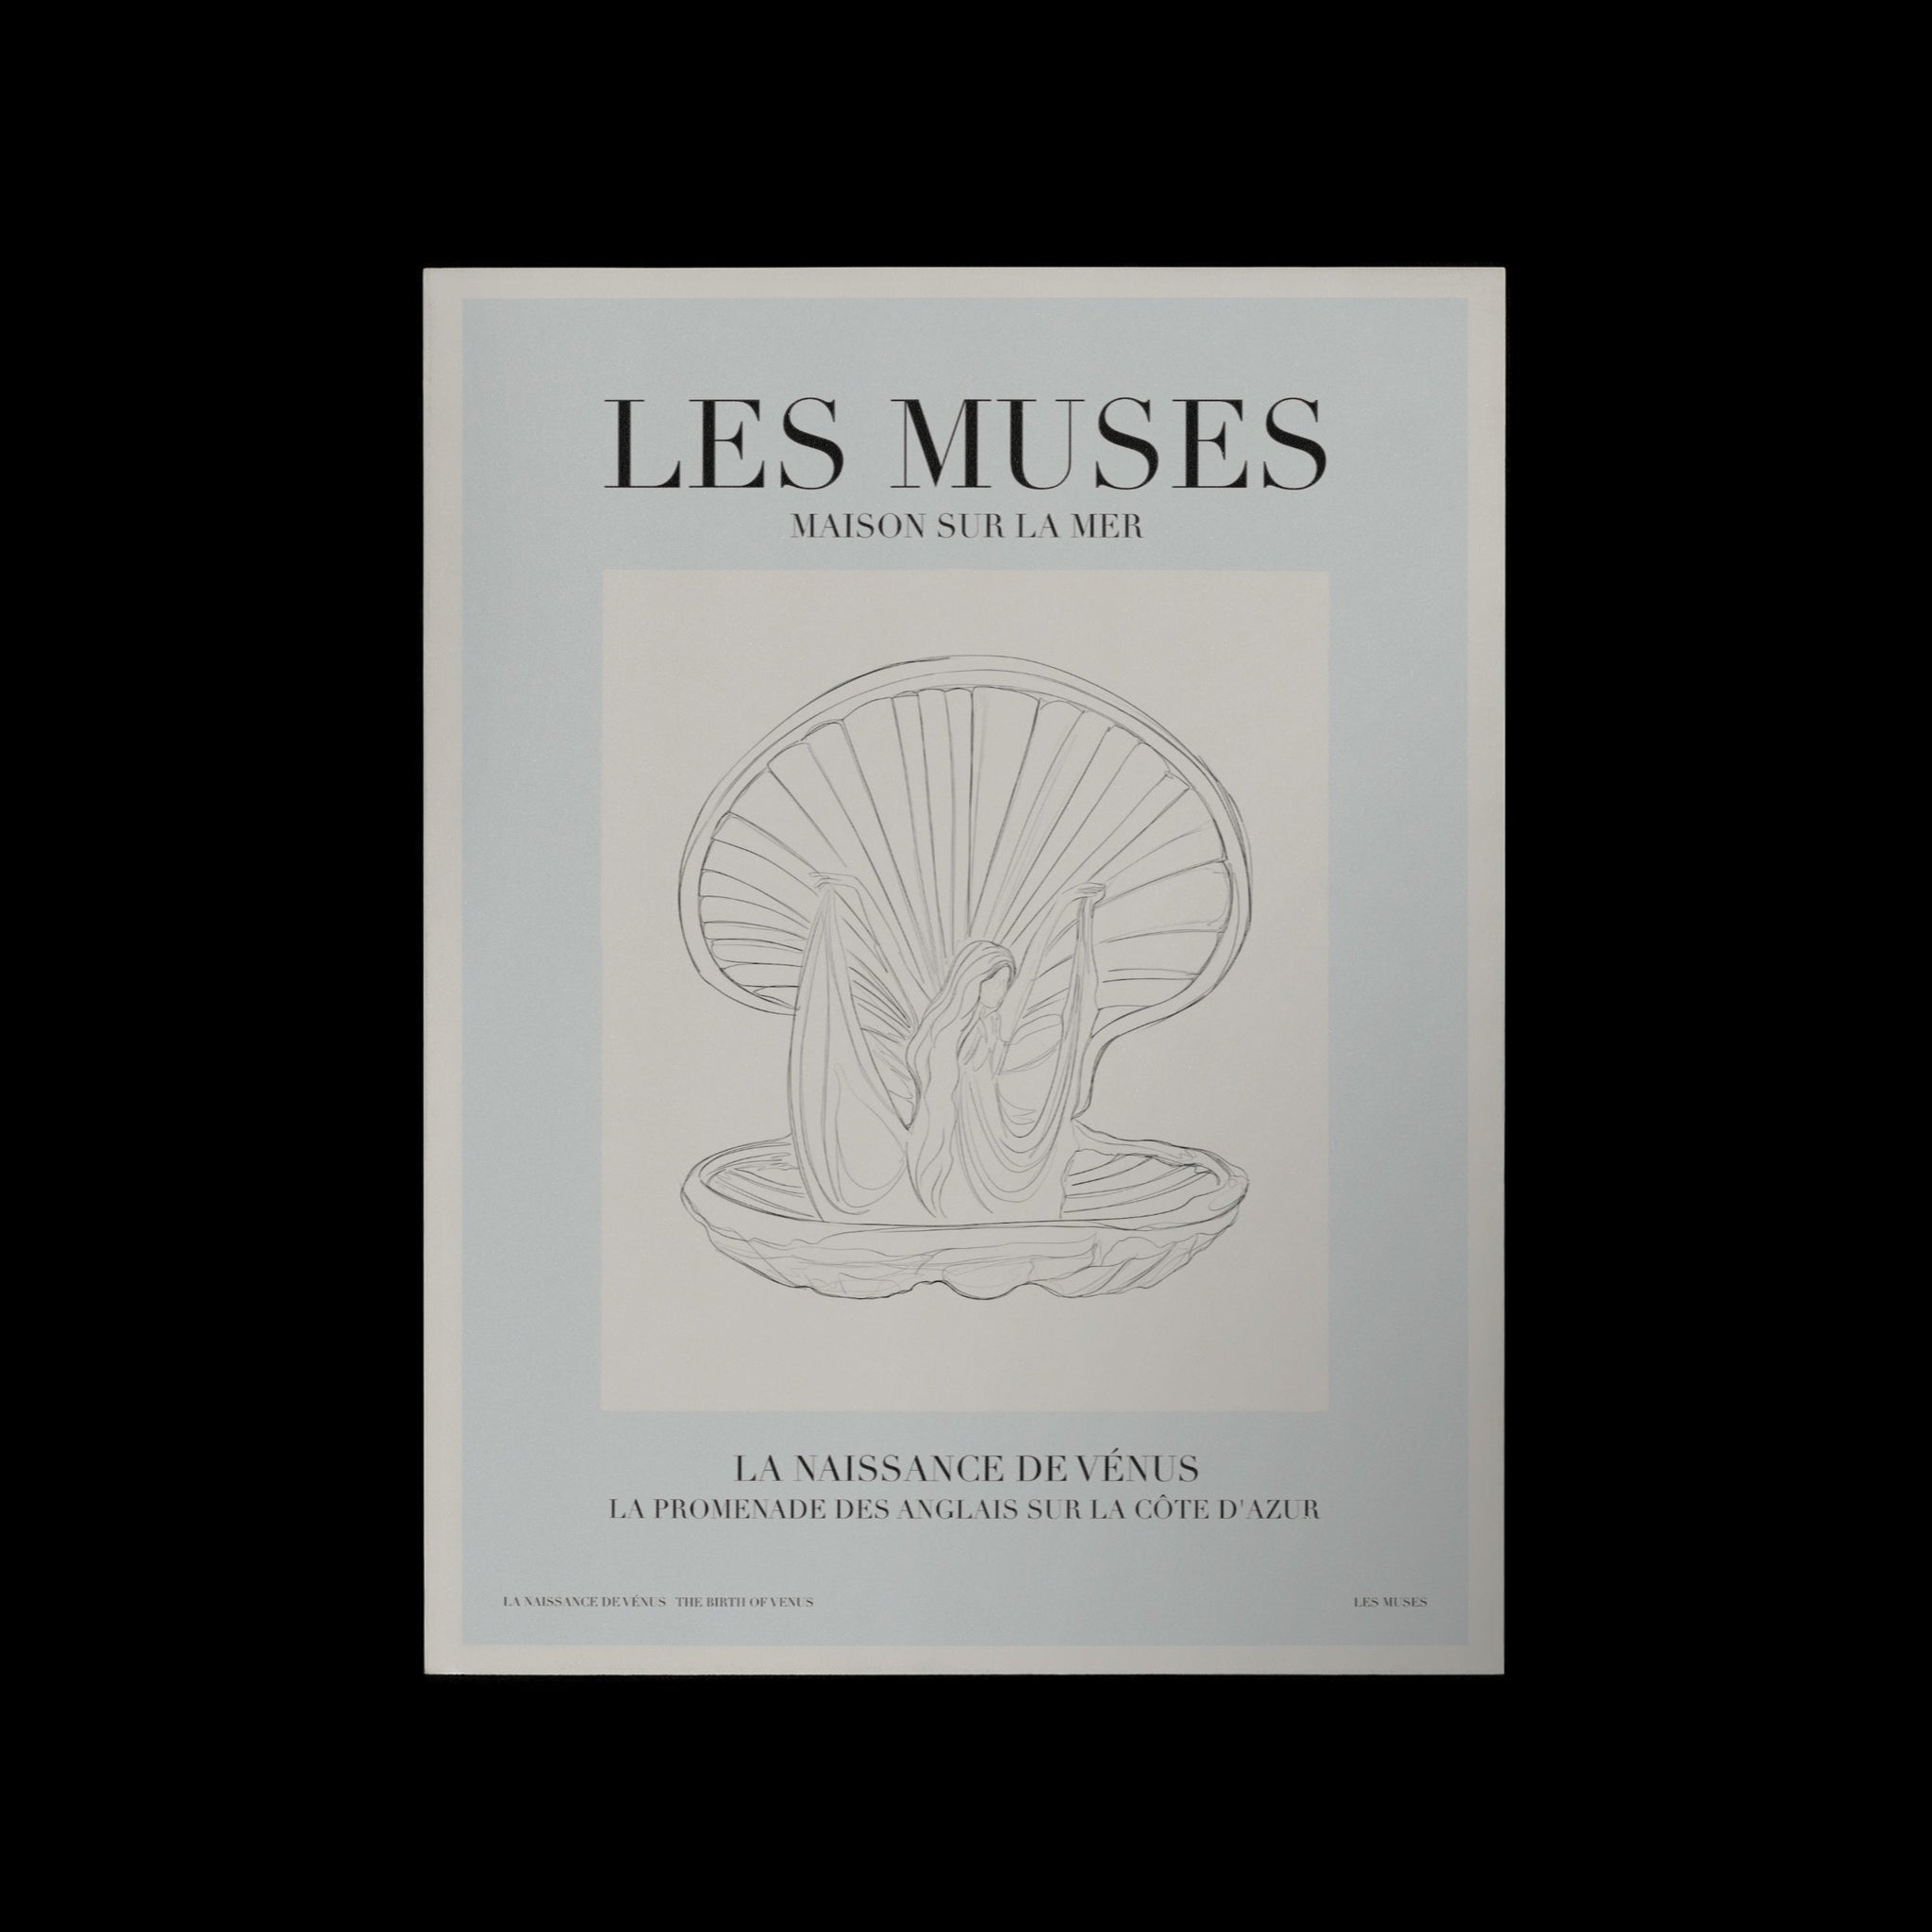 © les muses / Les Muses is a dreamy wall art collection of line art drawings and paintings.
Select among illustrations of greek goddesses, seashells, cherubs and muses. 